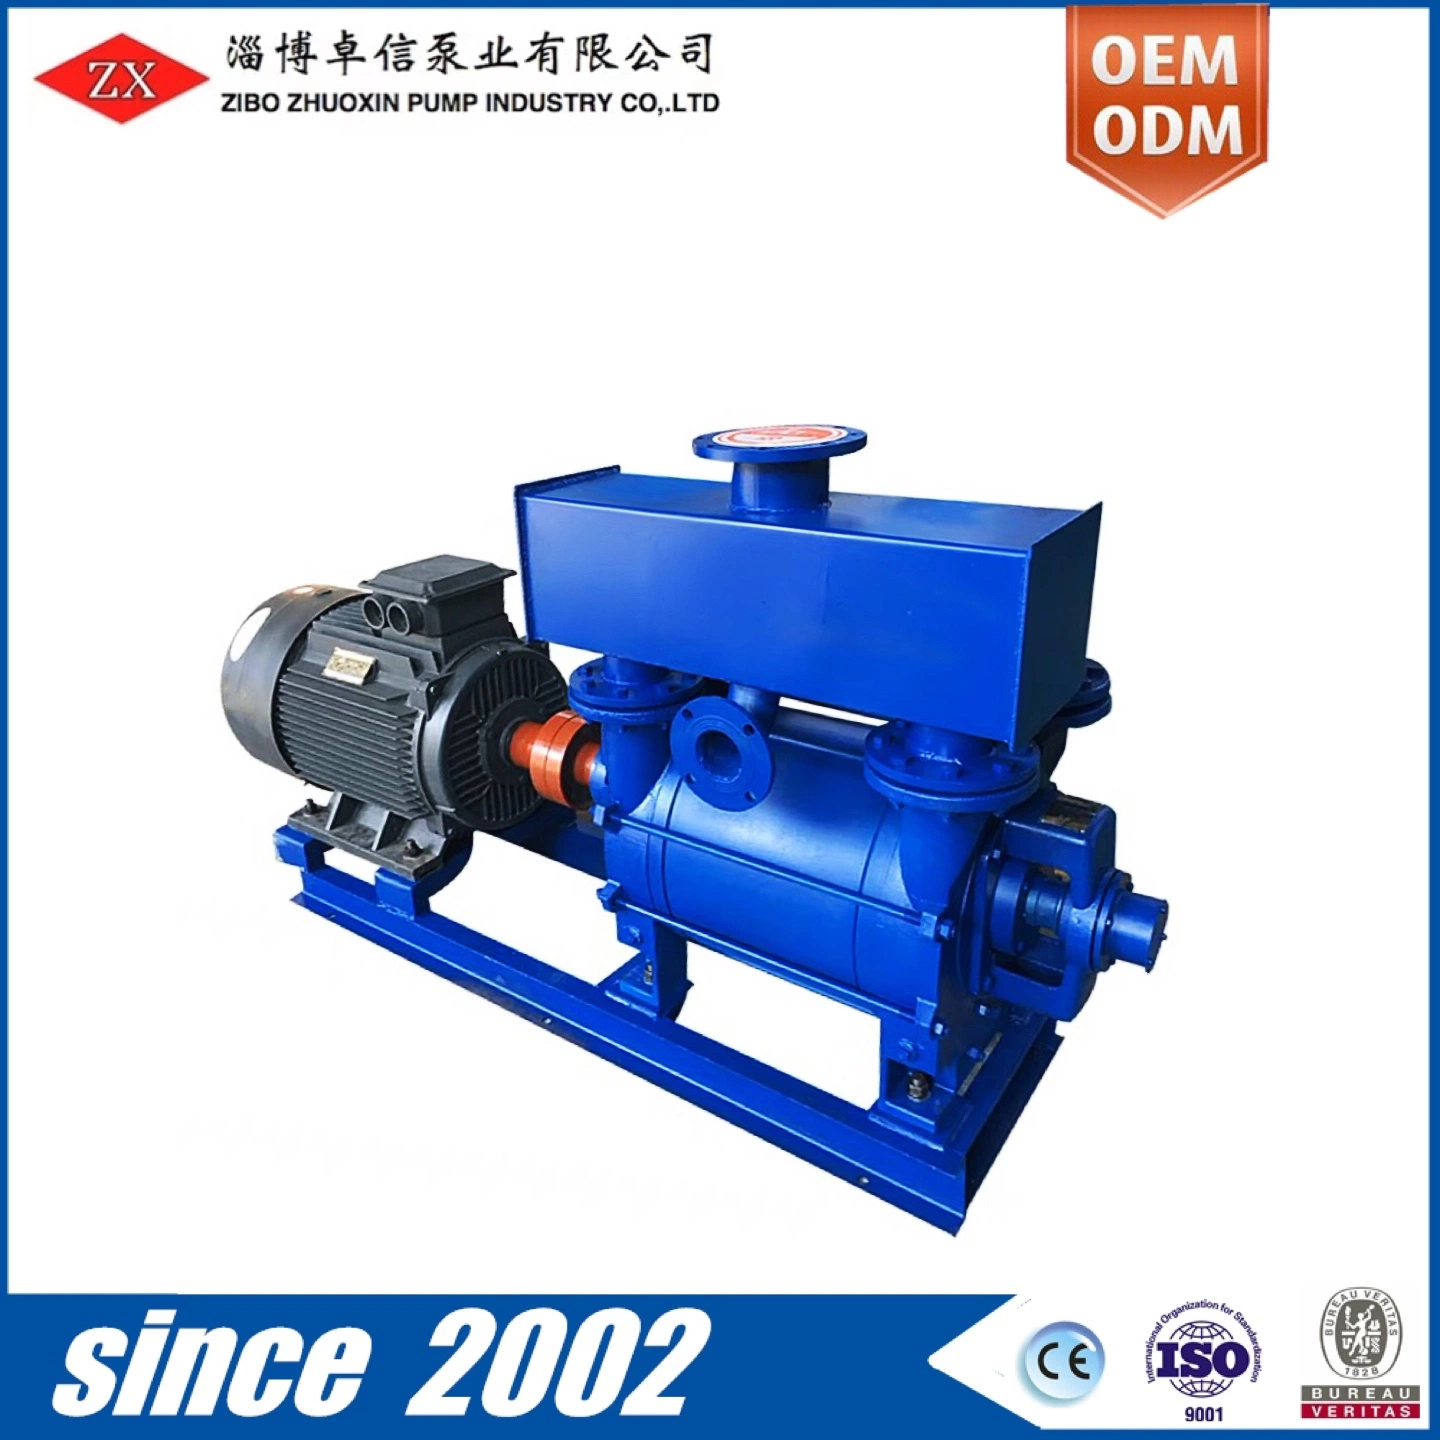 55kw, 75kw, 90kw and Other Water Ring Vacuum Pump Manufacturers Directly Supply 2be/2bea303